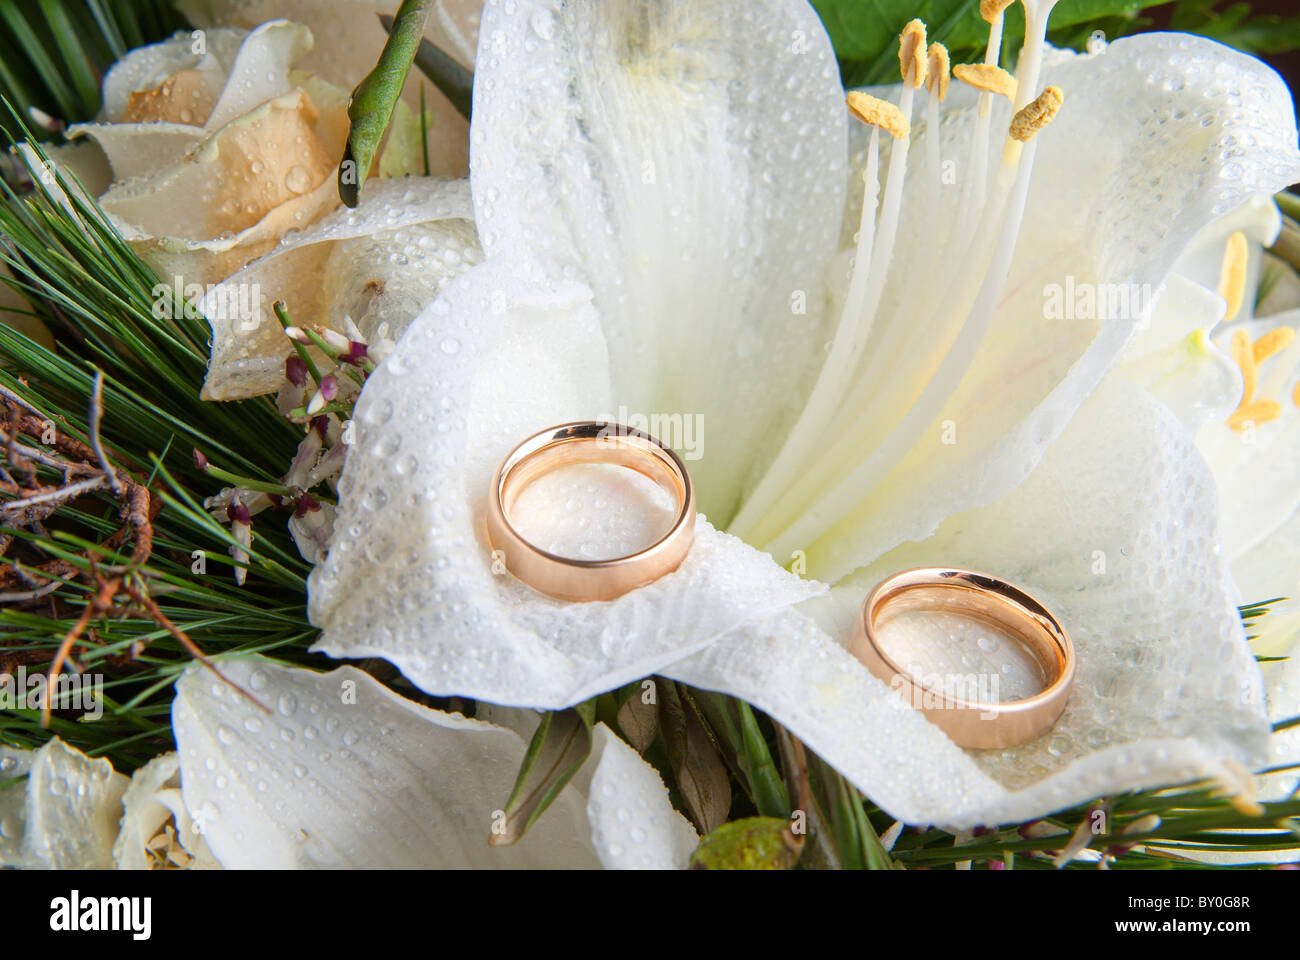 2 golden rings on a white orchid Stock Photo